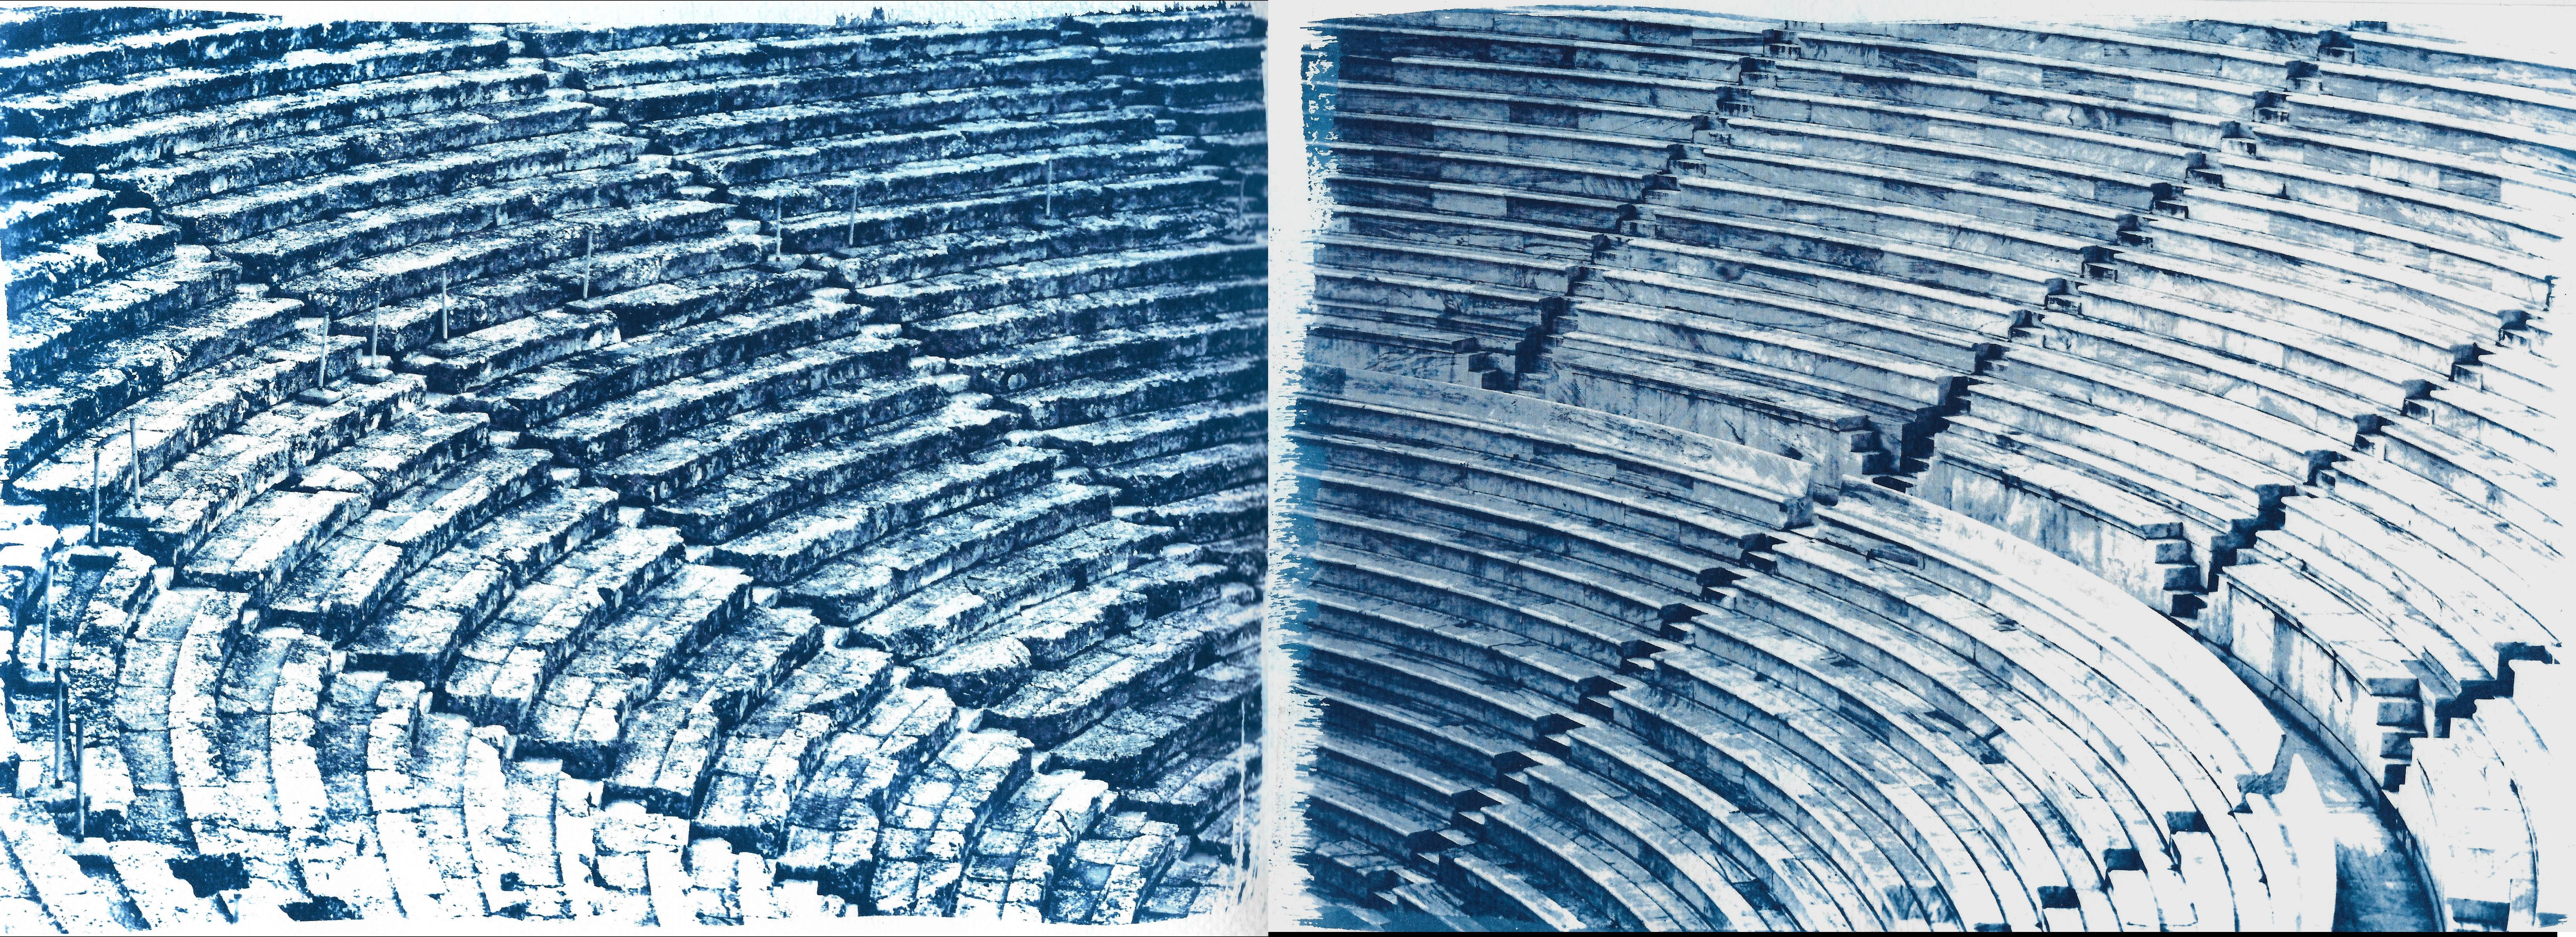 Kind of Cyan Landscape Print - Diptych of Ancient Theaters, 200cmx70cm Cyanotypes, Greek and Roman Architecture